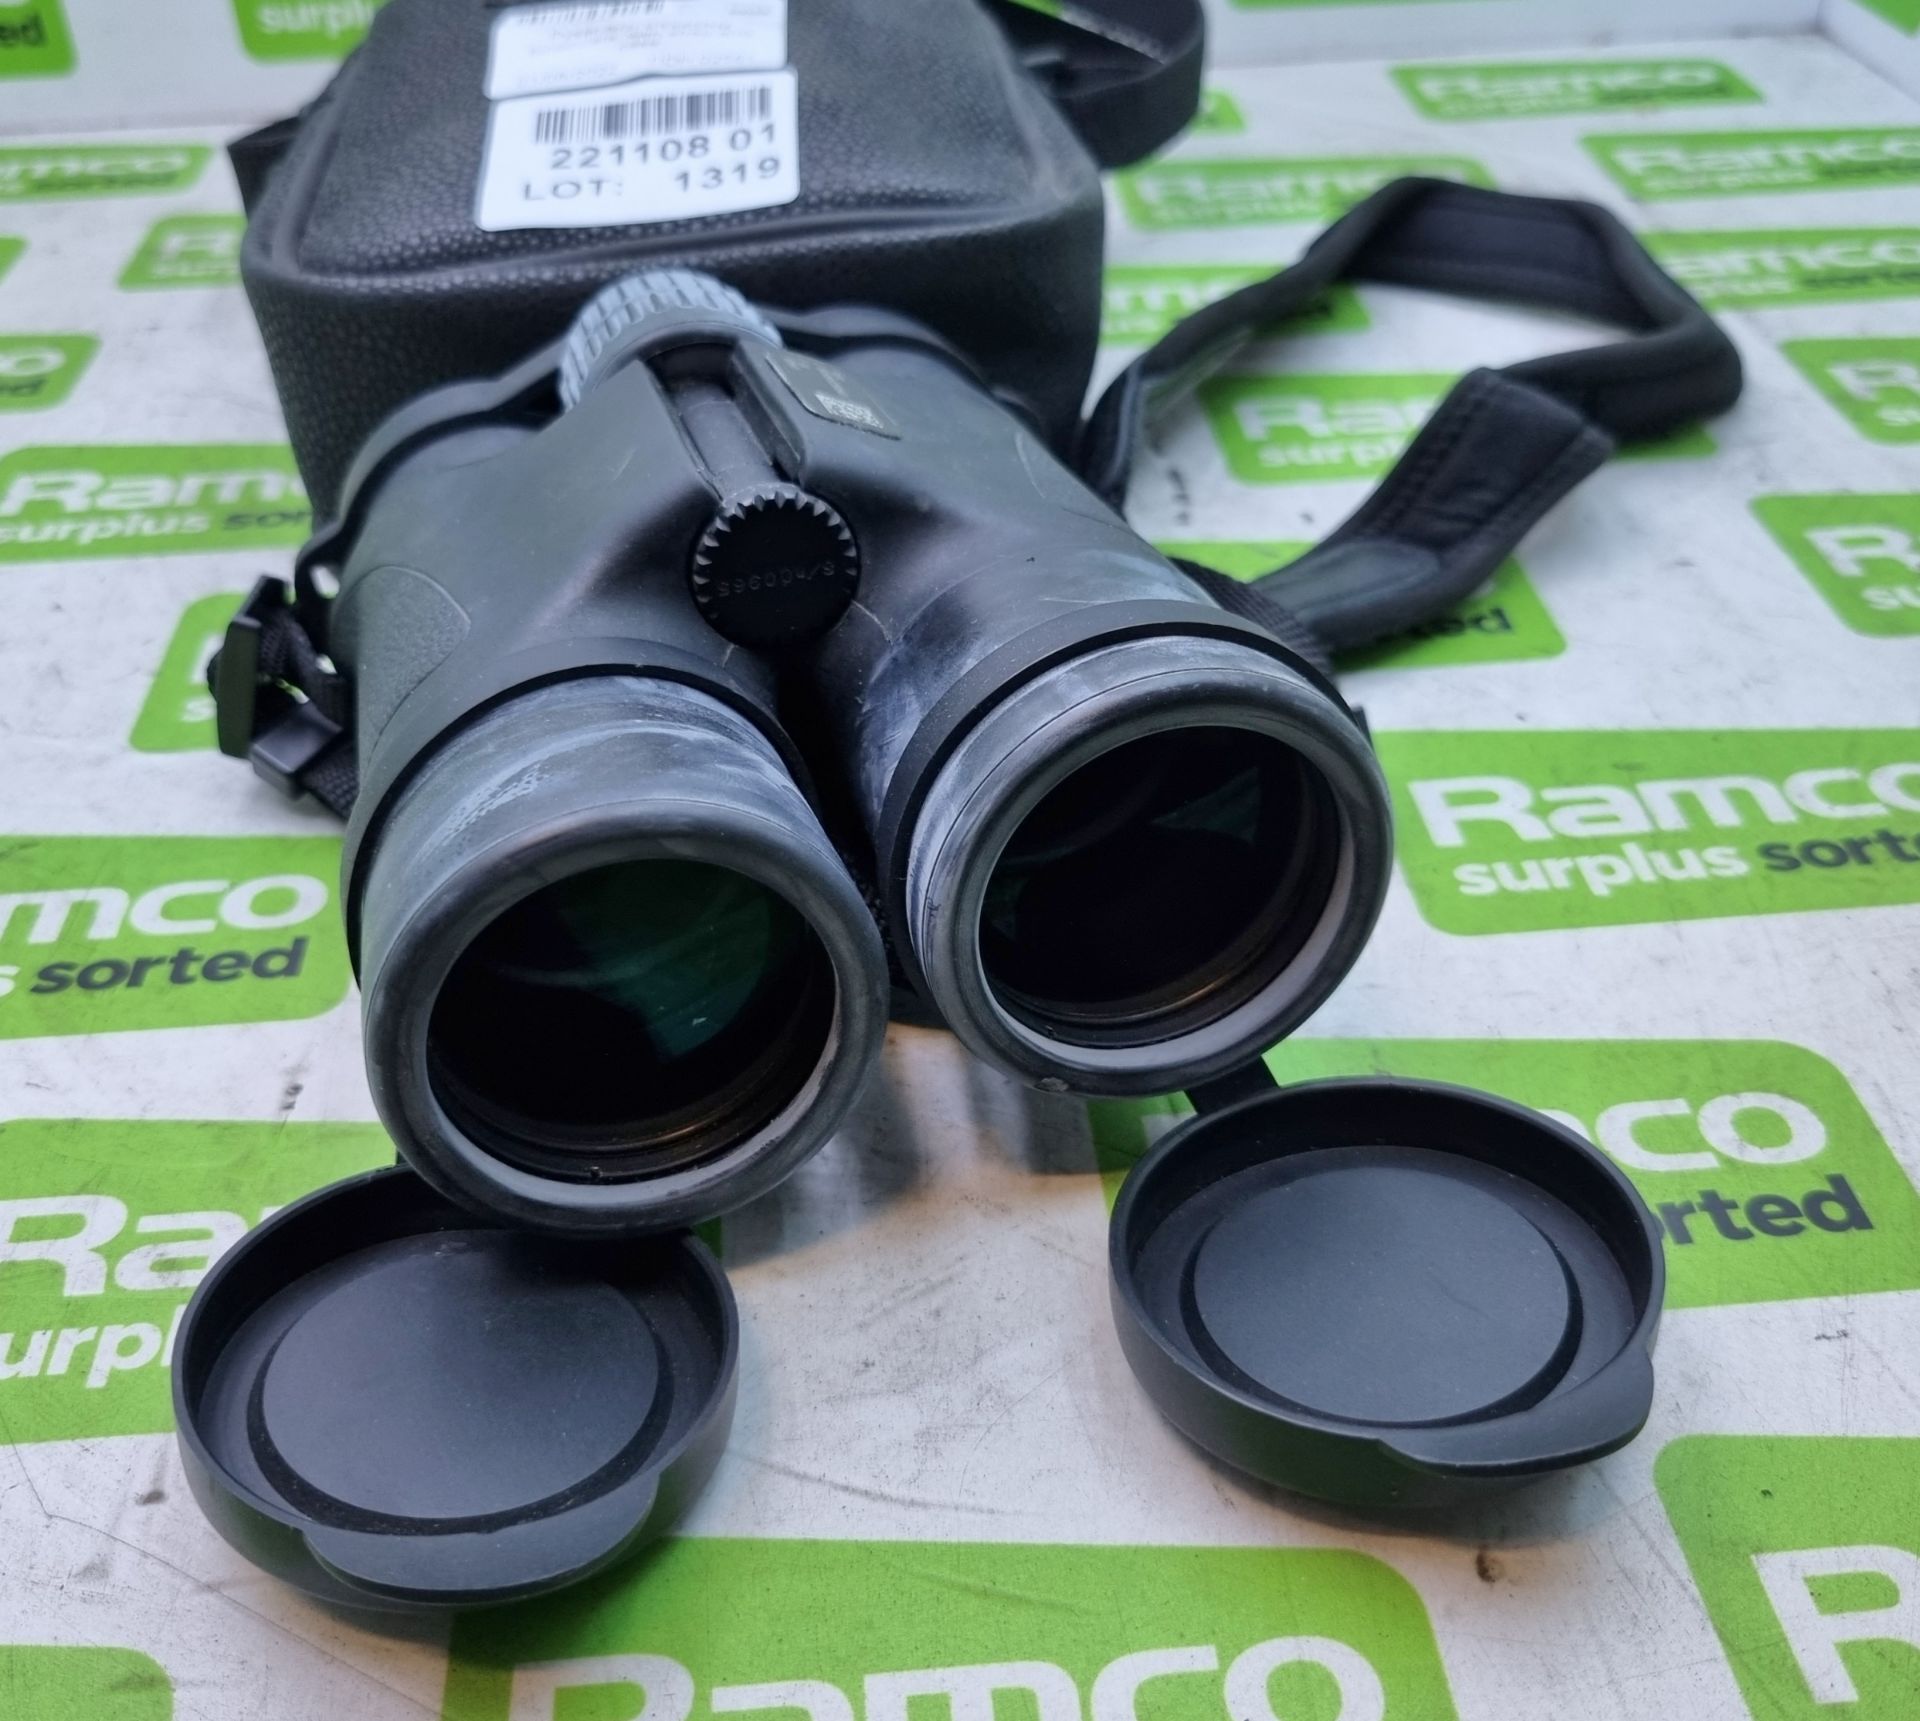 Pyser-SGI E8x42RM binoculars, with strap and case - Image 2 of 3